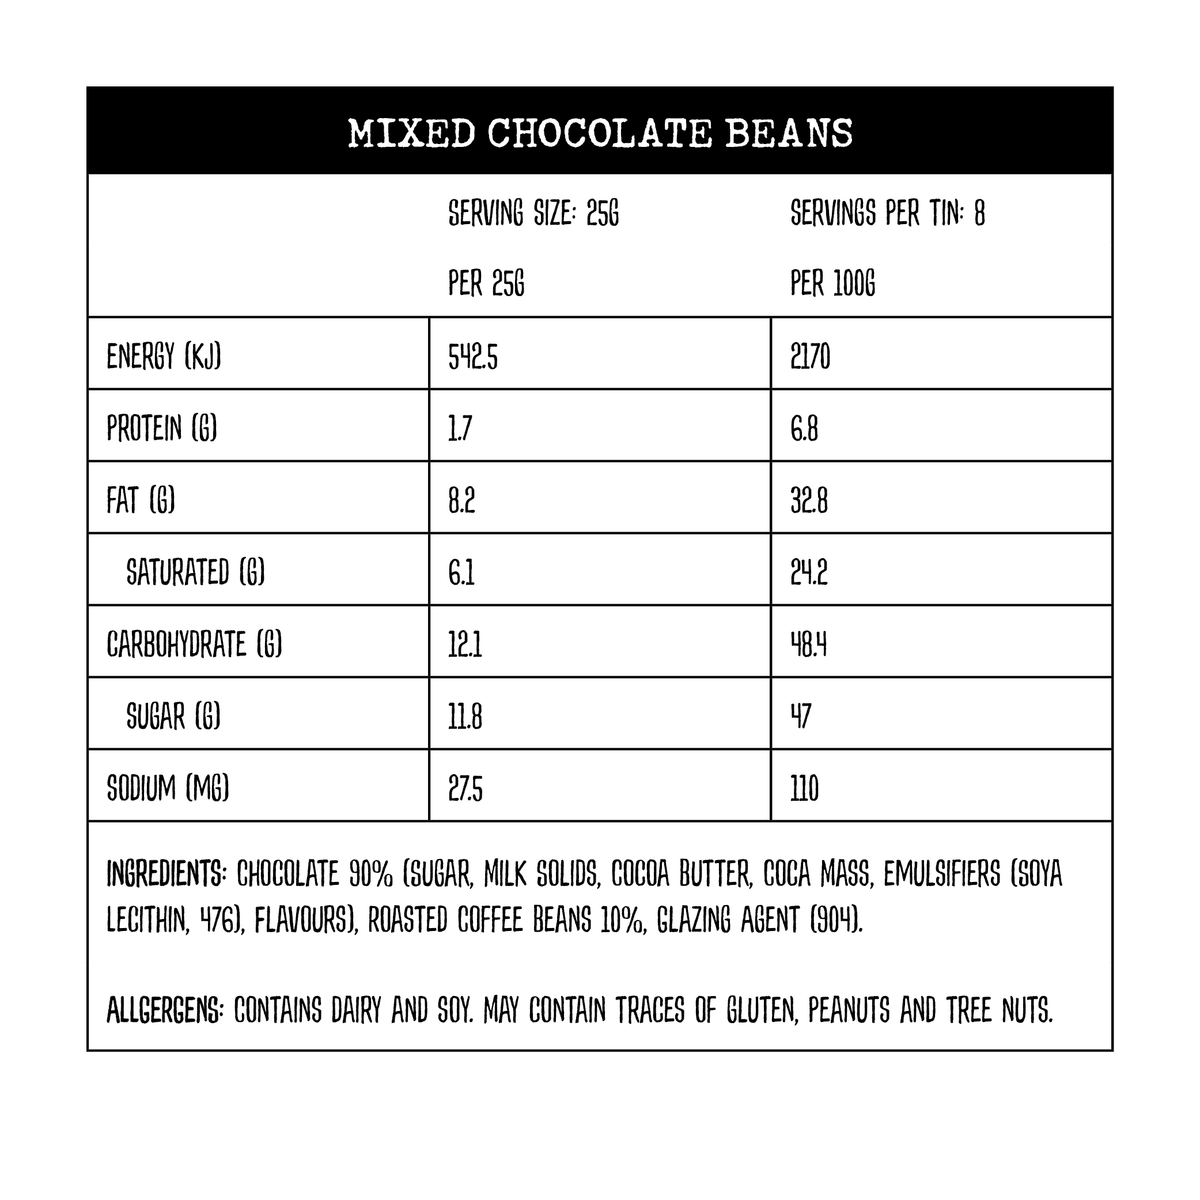 Mixed Chocolate Coated Coffee Beans Nutritional Information Yahava KoffeeWorks Western Australia Margaret River and Swan Valley